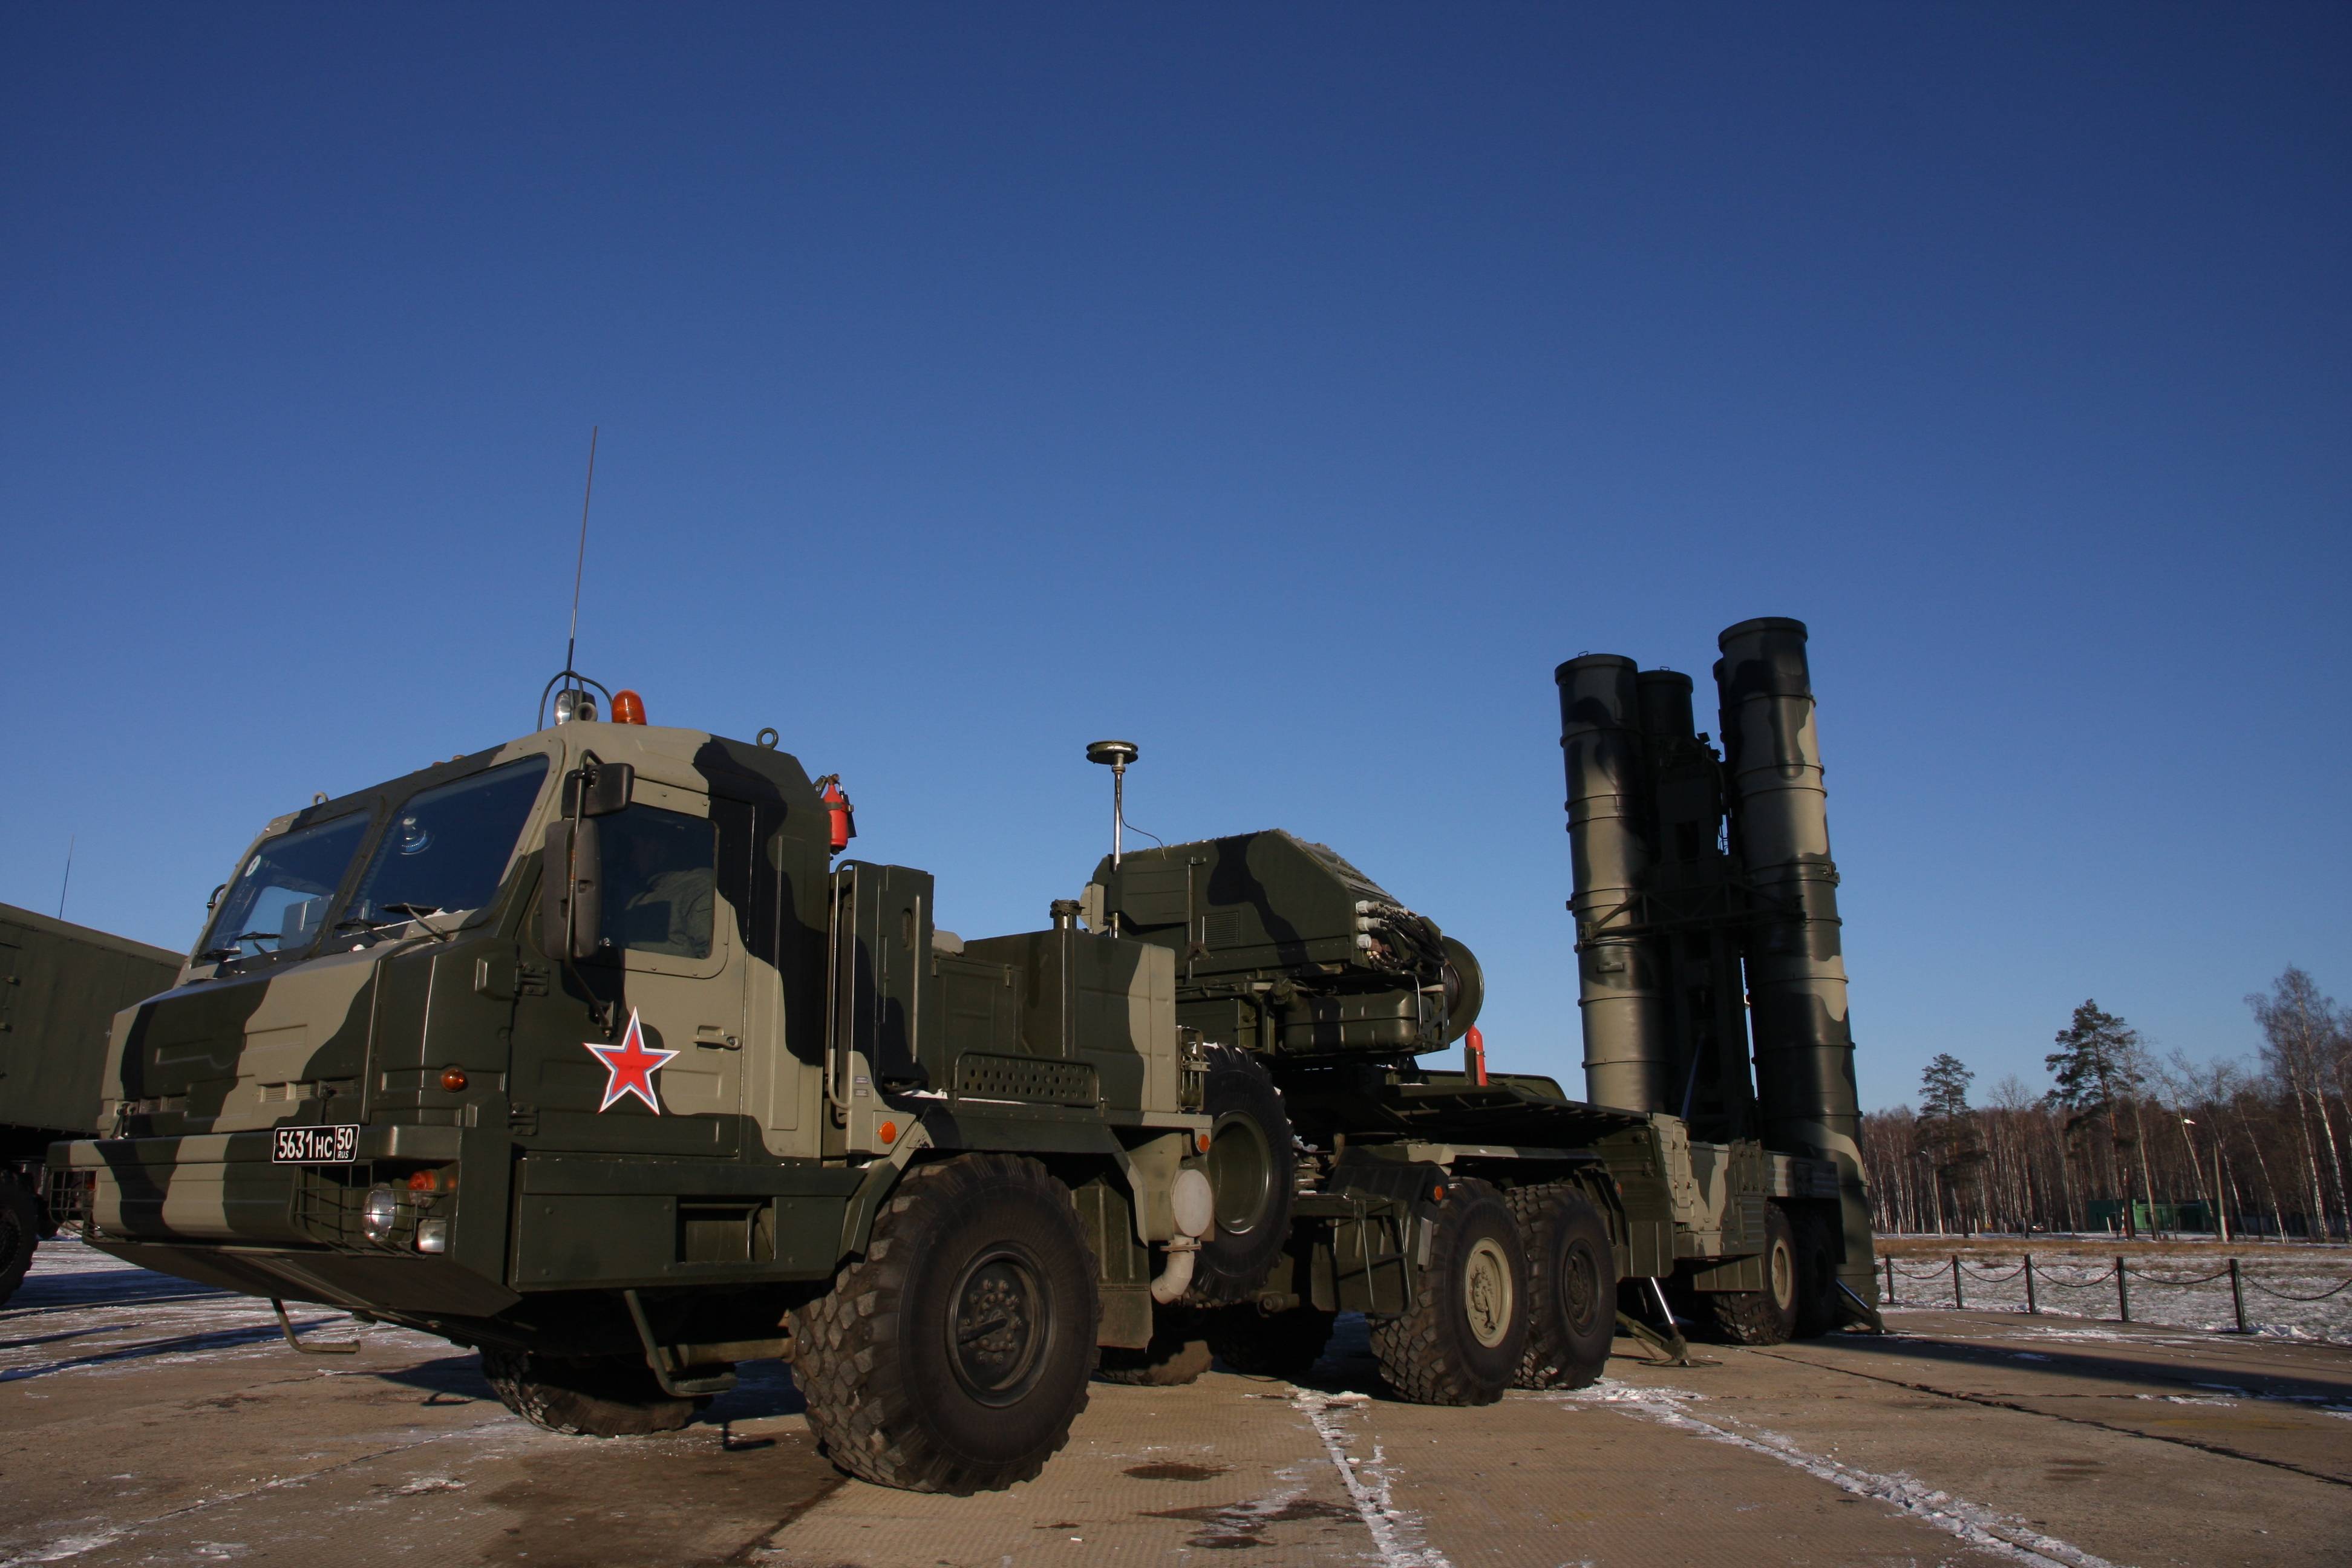 Russian Antiaircraft Missile System S-400 4k Ultra HD Wallpaper